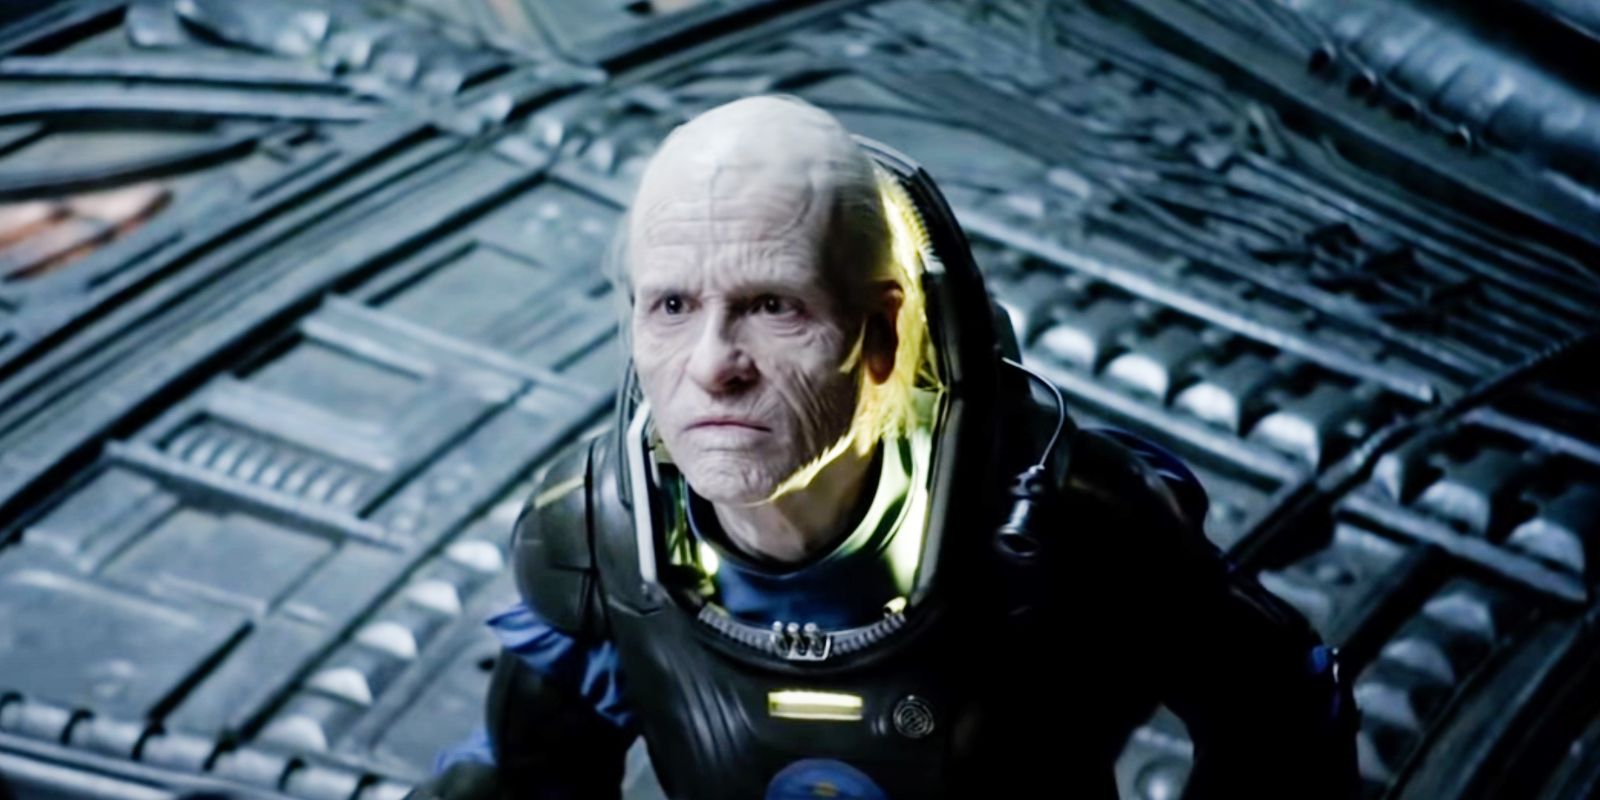 Guy Pearce as the CEO in Prometheus